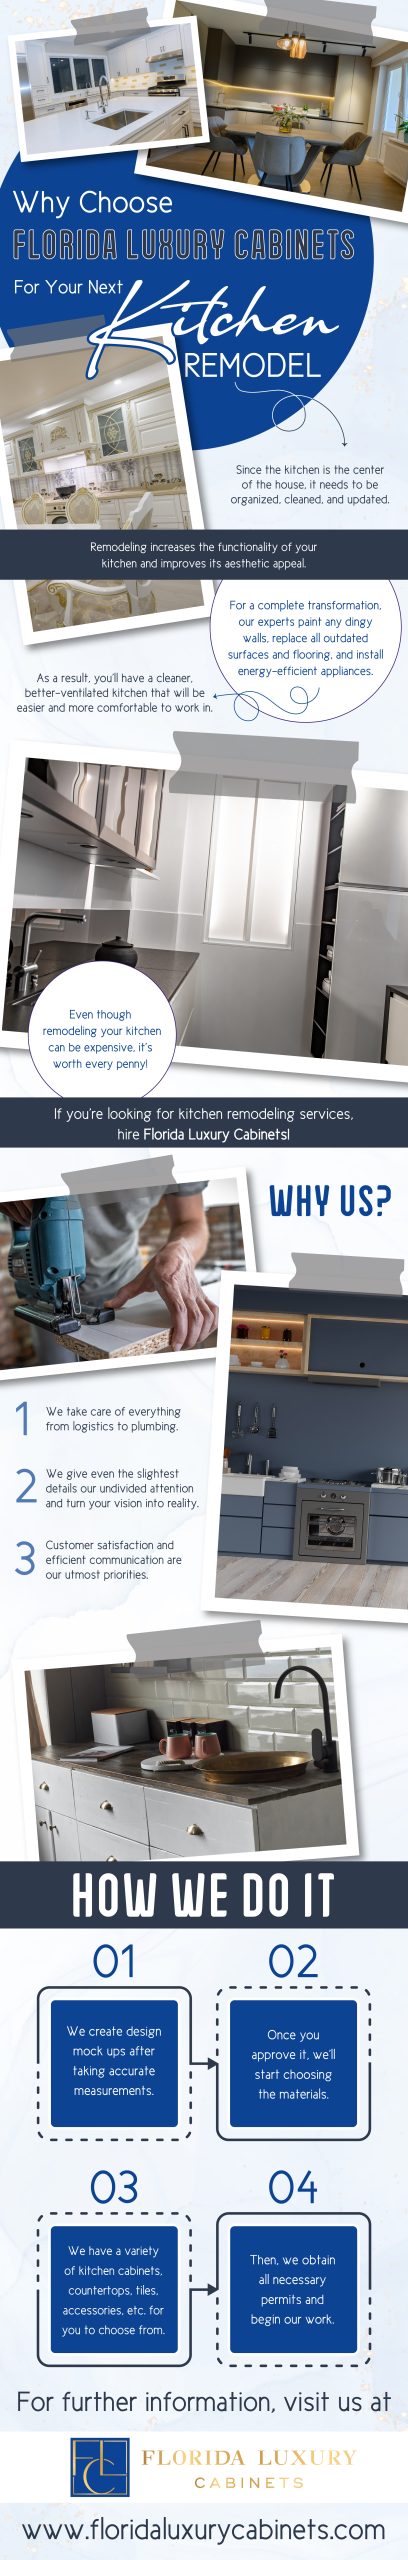 Why Choose Florida Luxury Cabinets For Your Next Kitchen Remodel